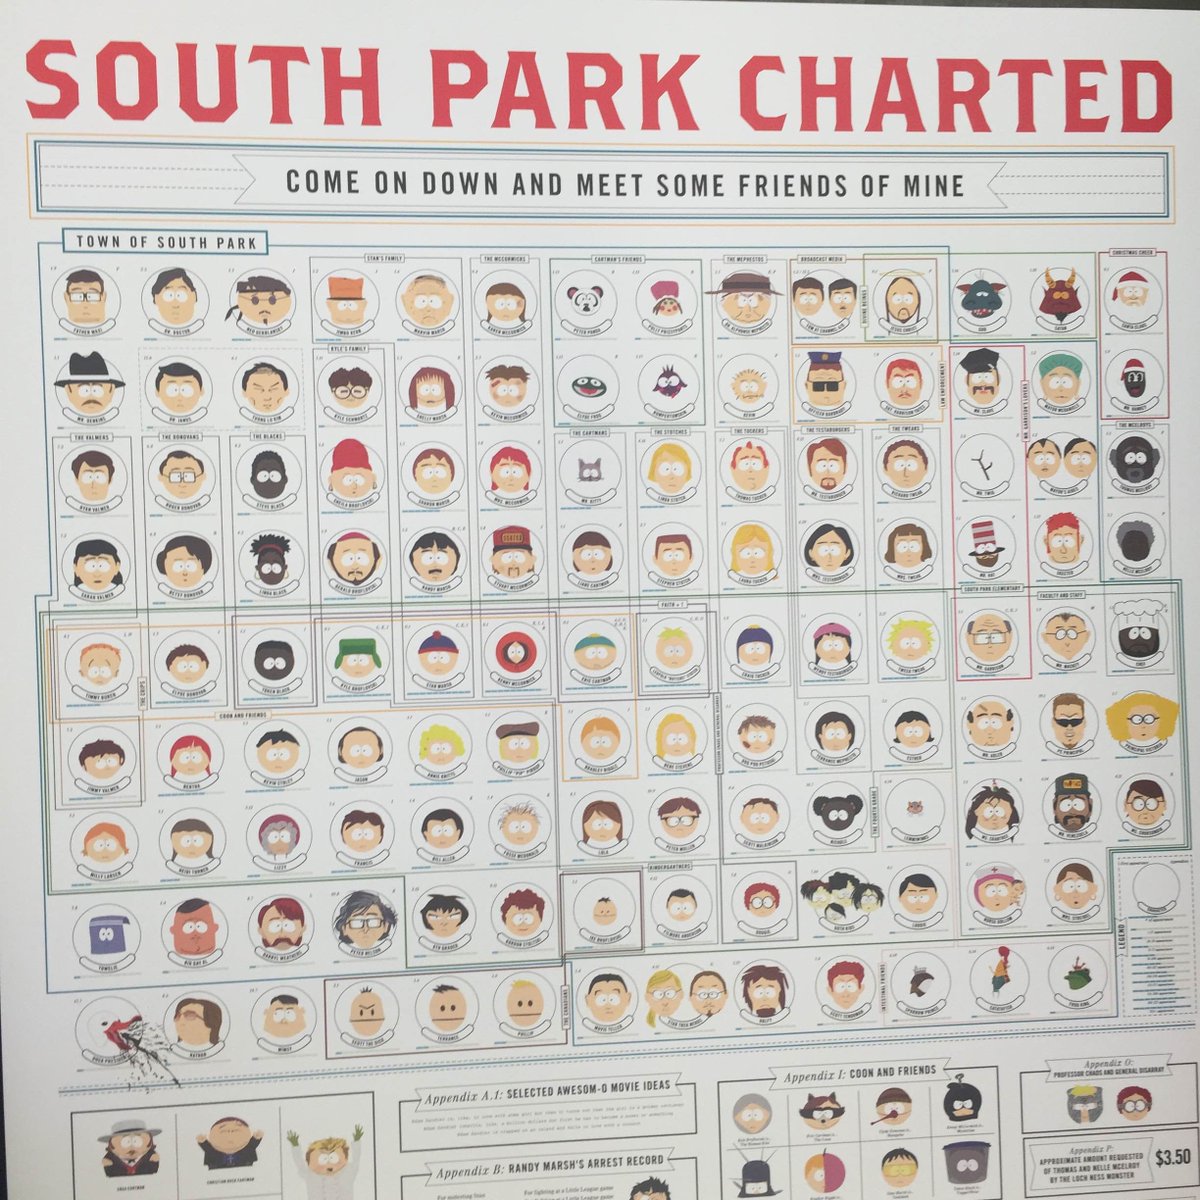 South Park Charted Poster